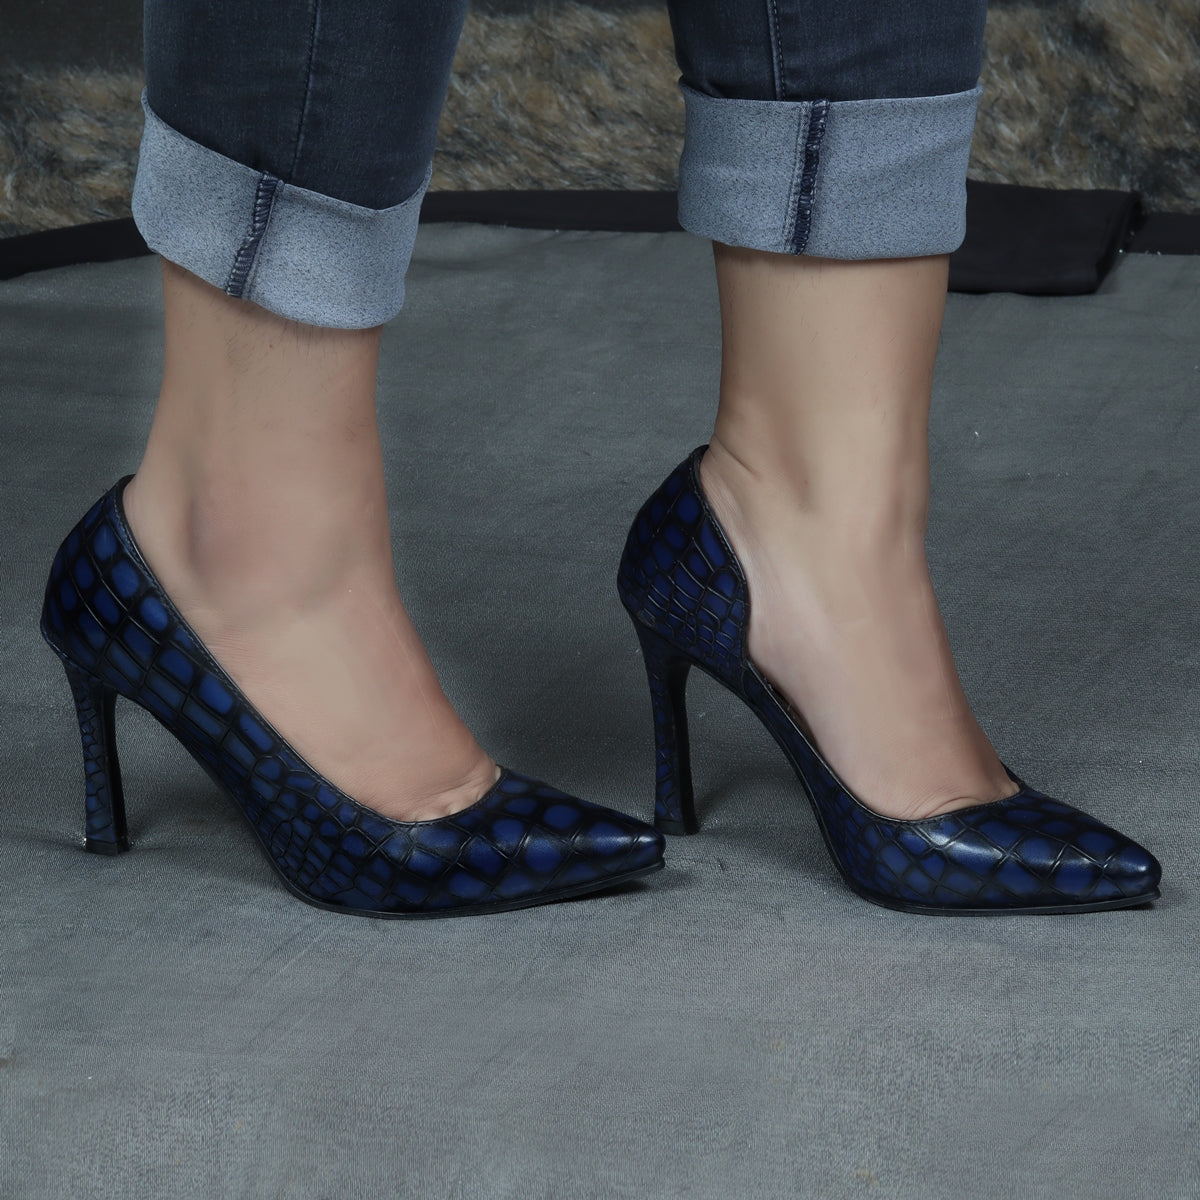 Chic Navy Blue Odile Effect Sext Pointed Toe Stiletto Dress Pumps For Women  Slip On Blue Stiletto Heels With Printed Design, Available In Sizes 33 45  From Dbj6, $50.74 | DHgate.Com